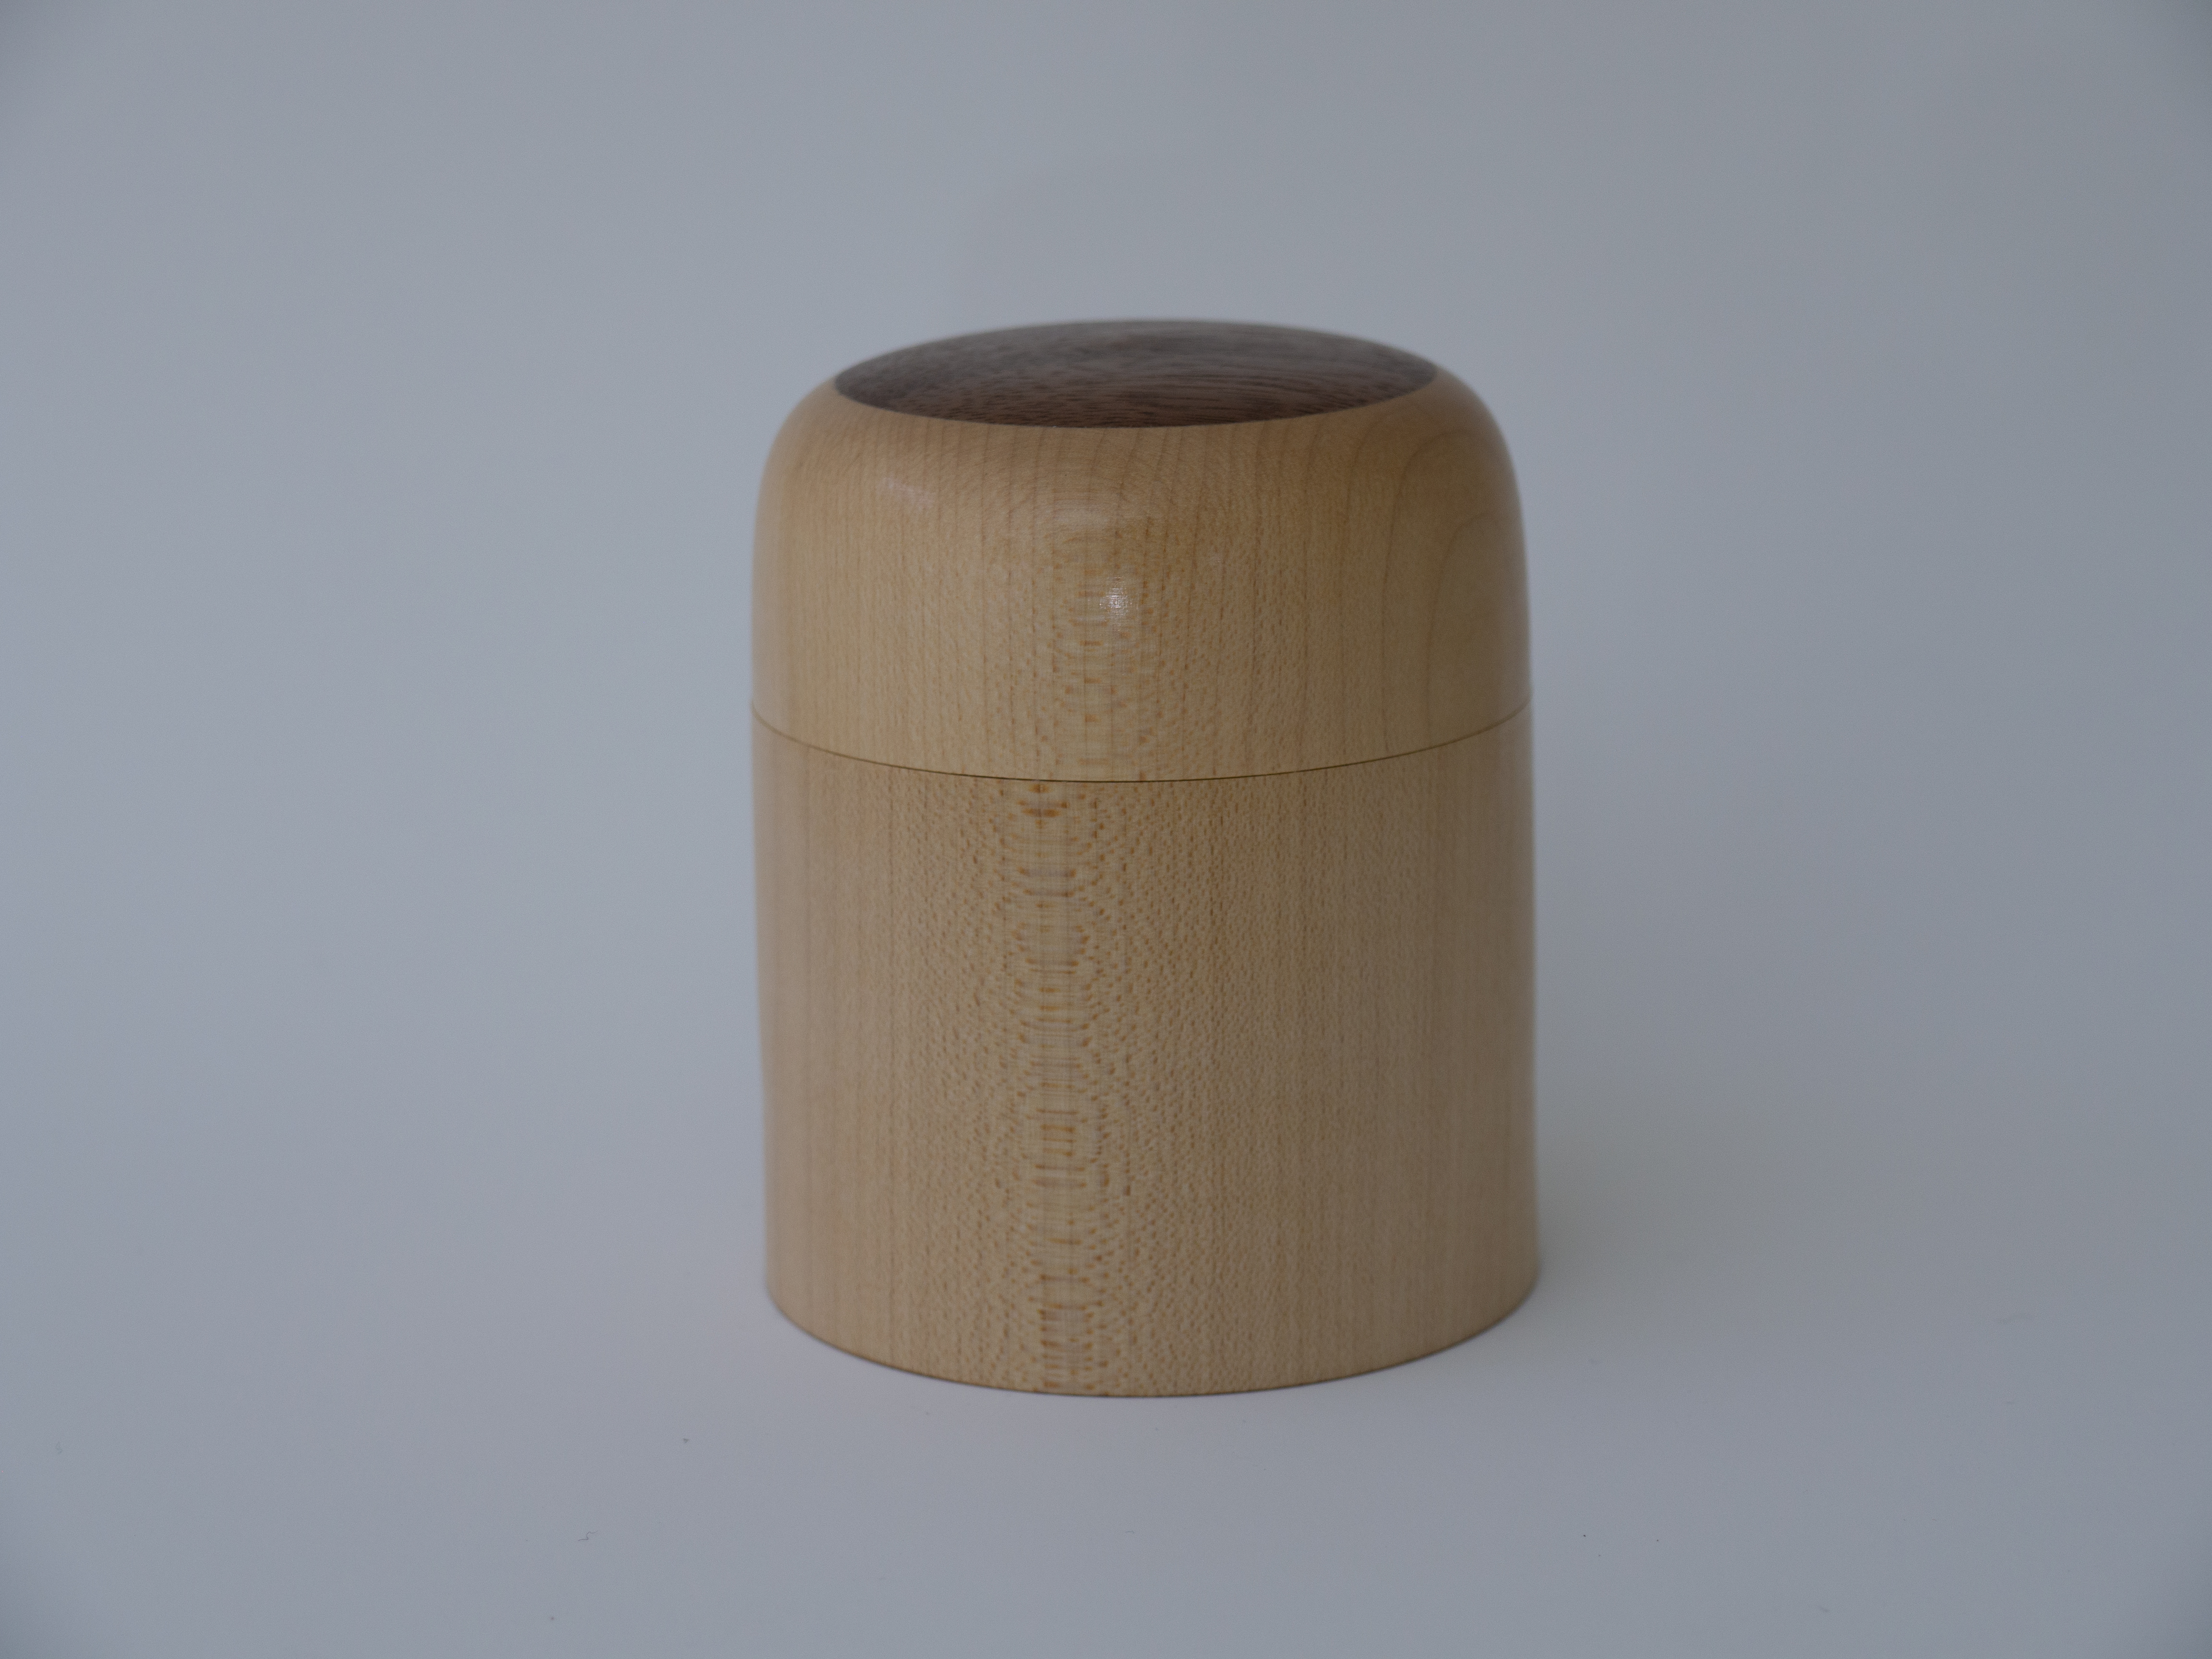 a small lidded box of wood with a walnut inlay on the lid sitting on a white background